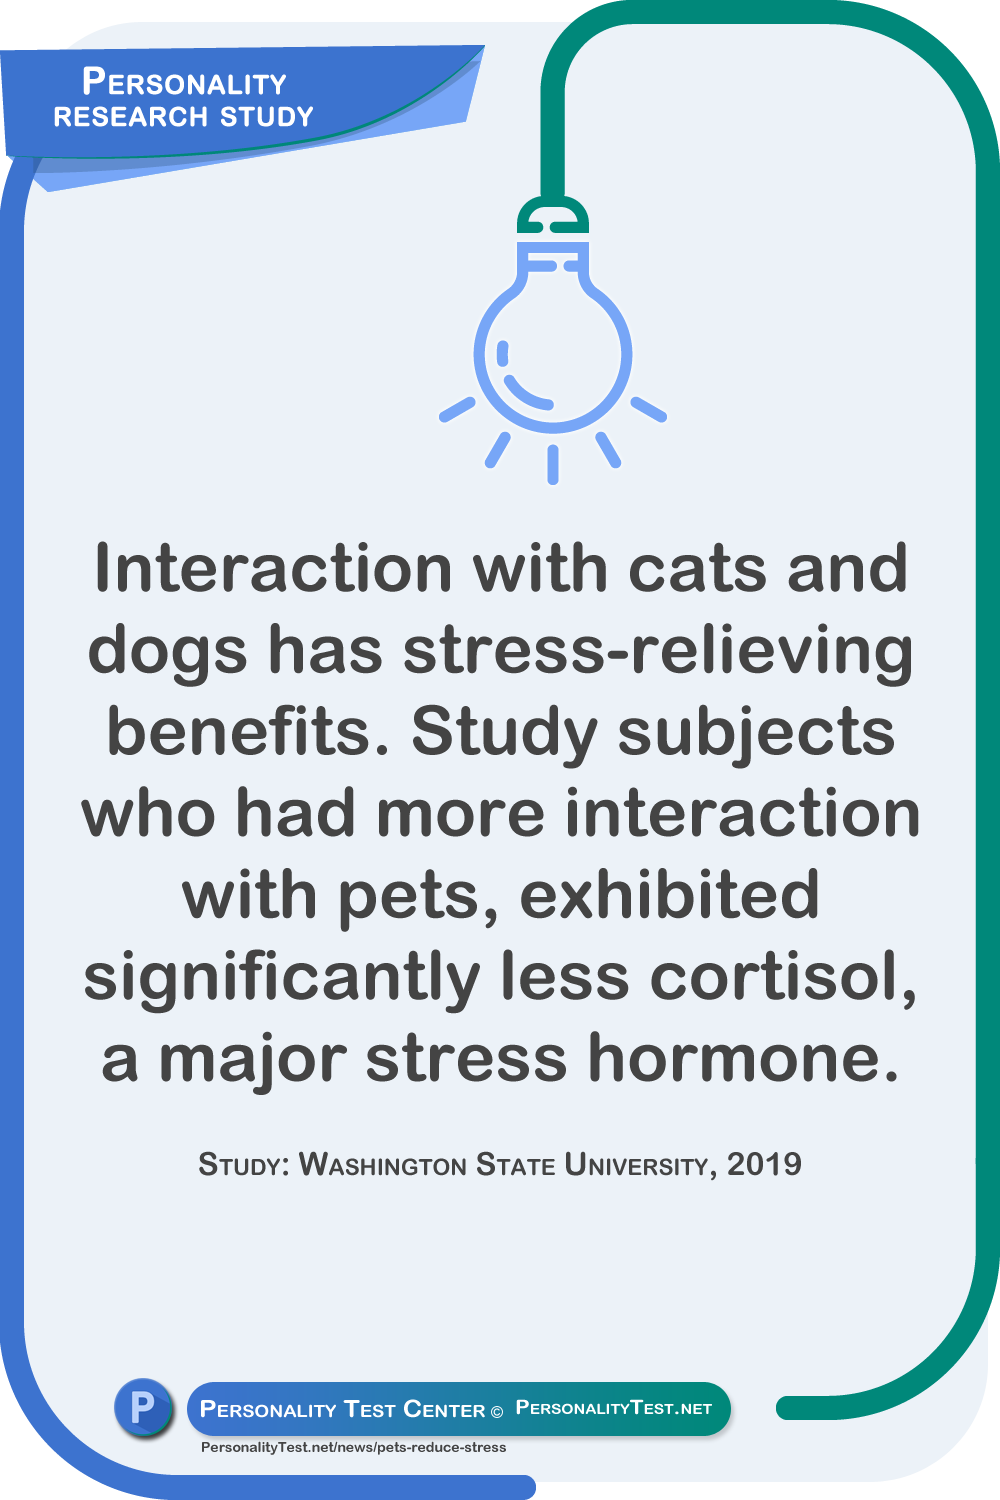 Interaction with cats and dogs has stress-relieving benefits. Study subjects who had more interaction with pets, exhibited significantly less cortisol, a major stress hormone. Study: Washington State University, 2019